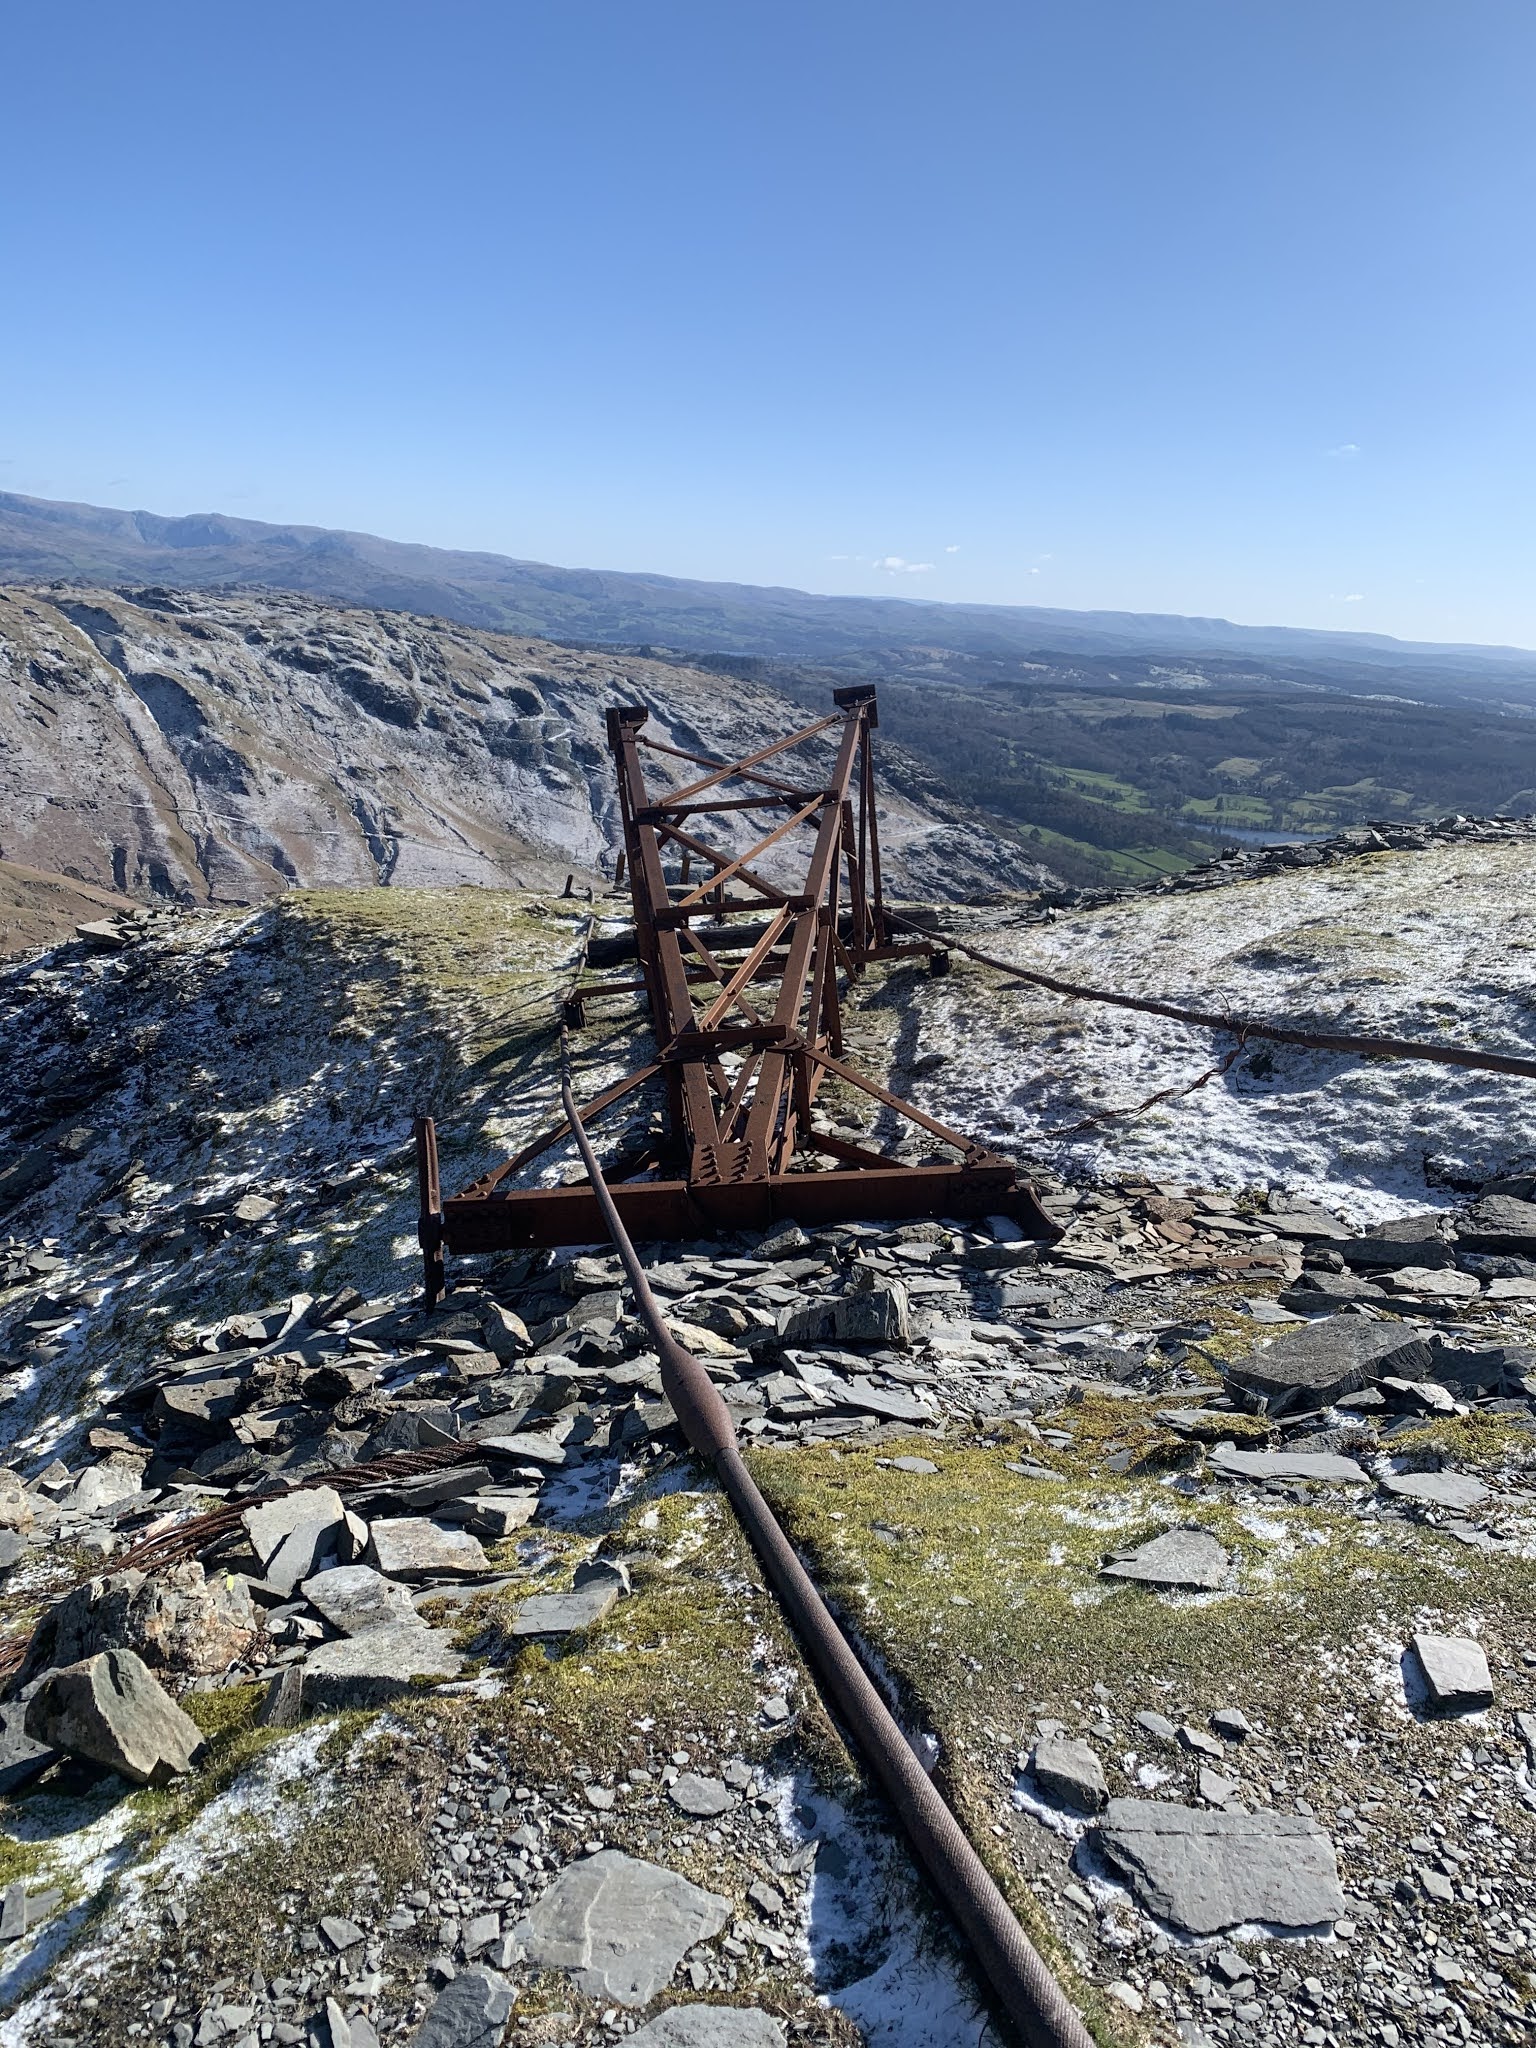 Abandoned electrical pylon that is now rusty on the hike up old man of coniston